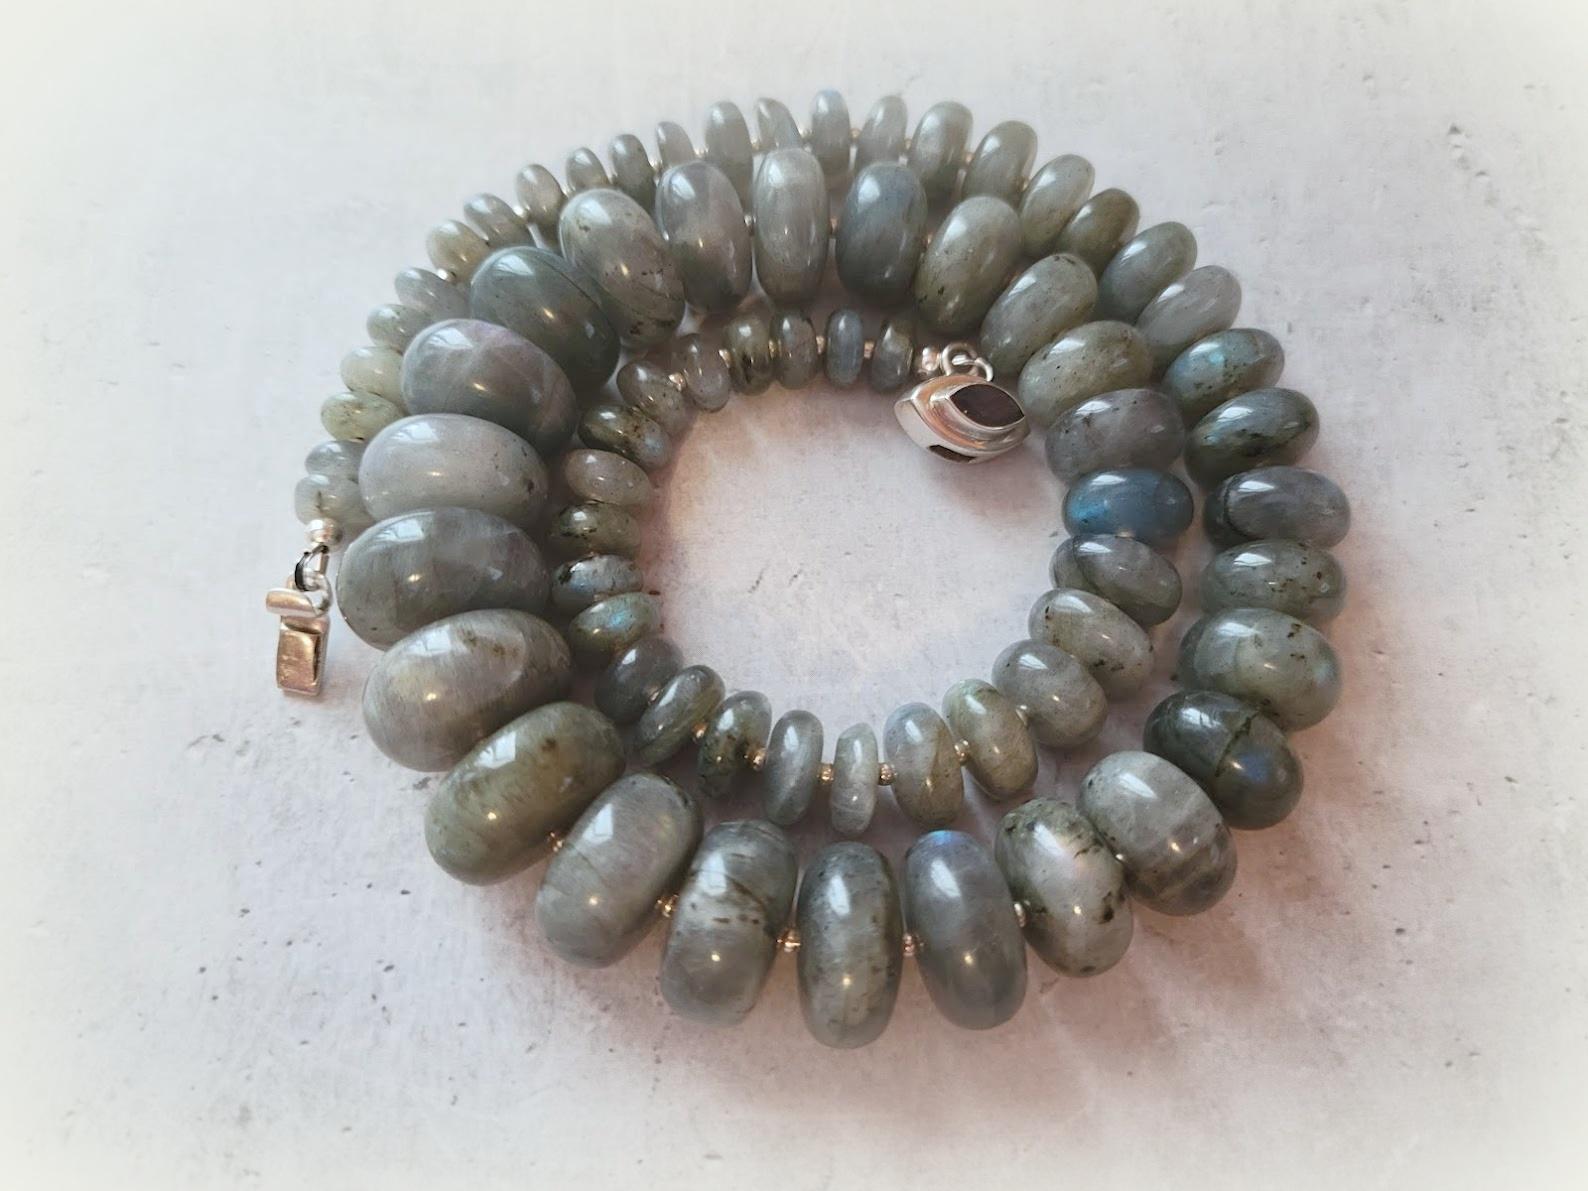 The length of the necklace is 19.5 inches (50 cm). The size of the smooth rondelle beads varies from 8 mm to 18 mm. 
The color of the beads varies from light gray to soft blue to dark gray. The beads have a delightfully soft, gentle, grey-blue tone